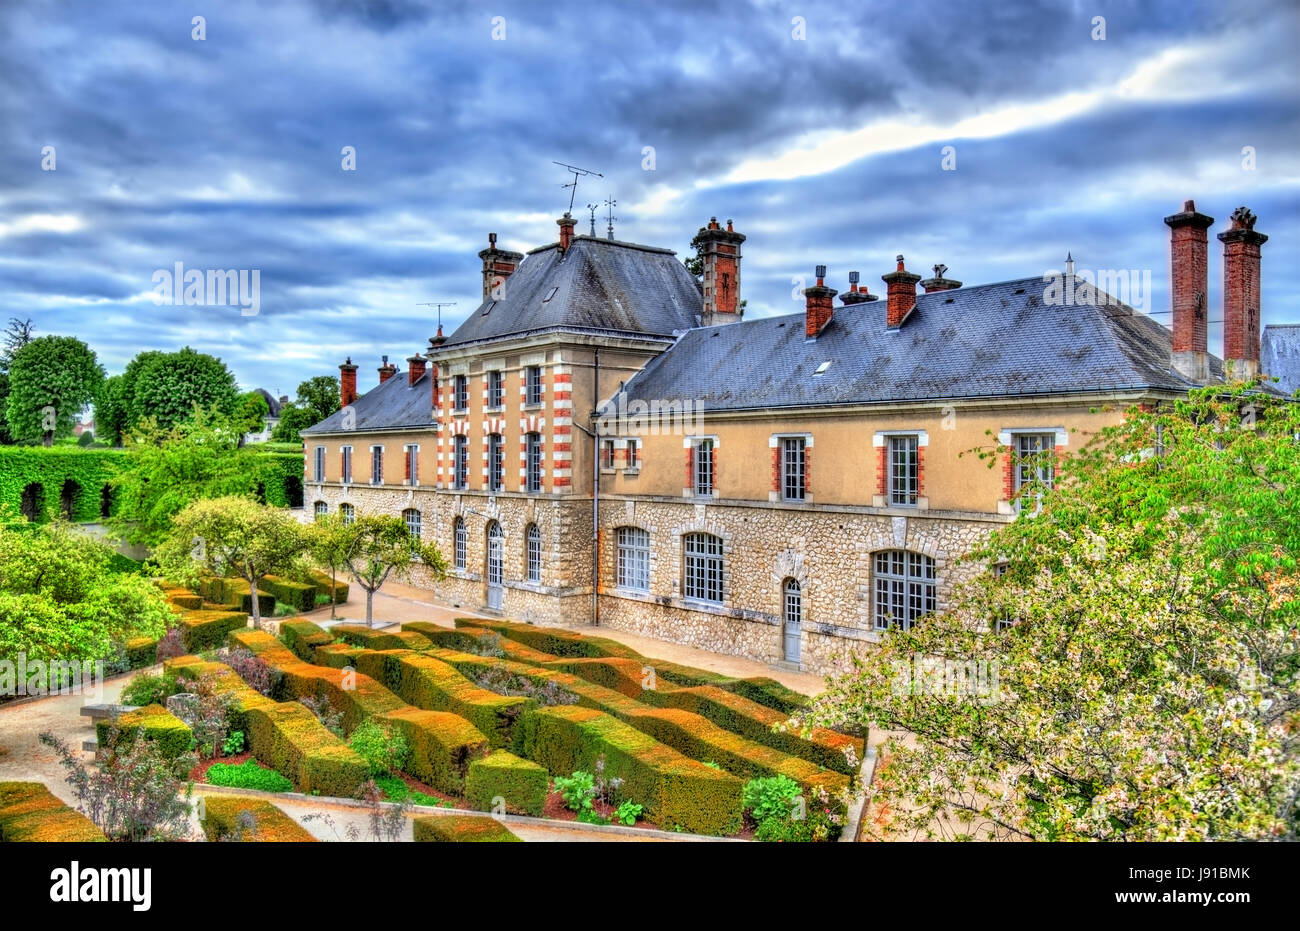 Historic building in Blois, France Stock Photo